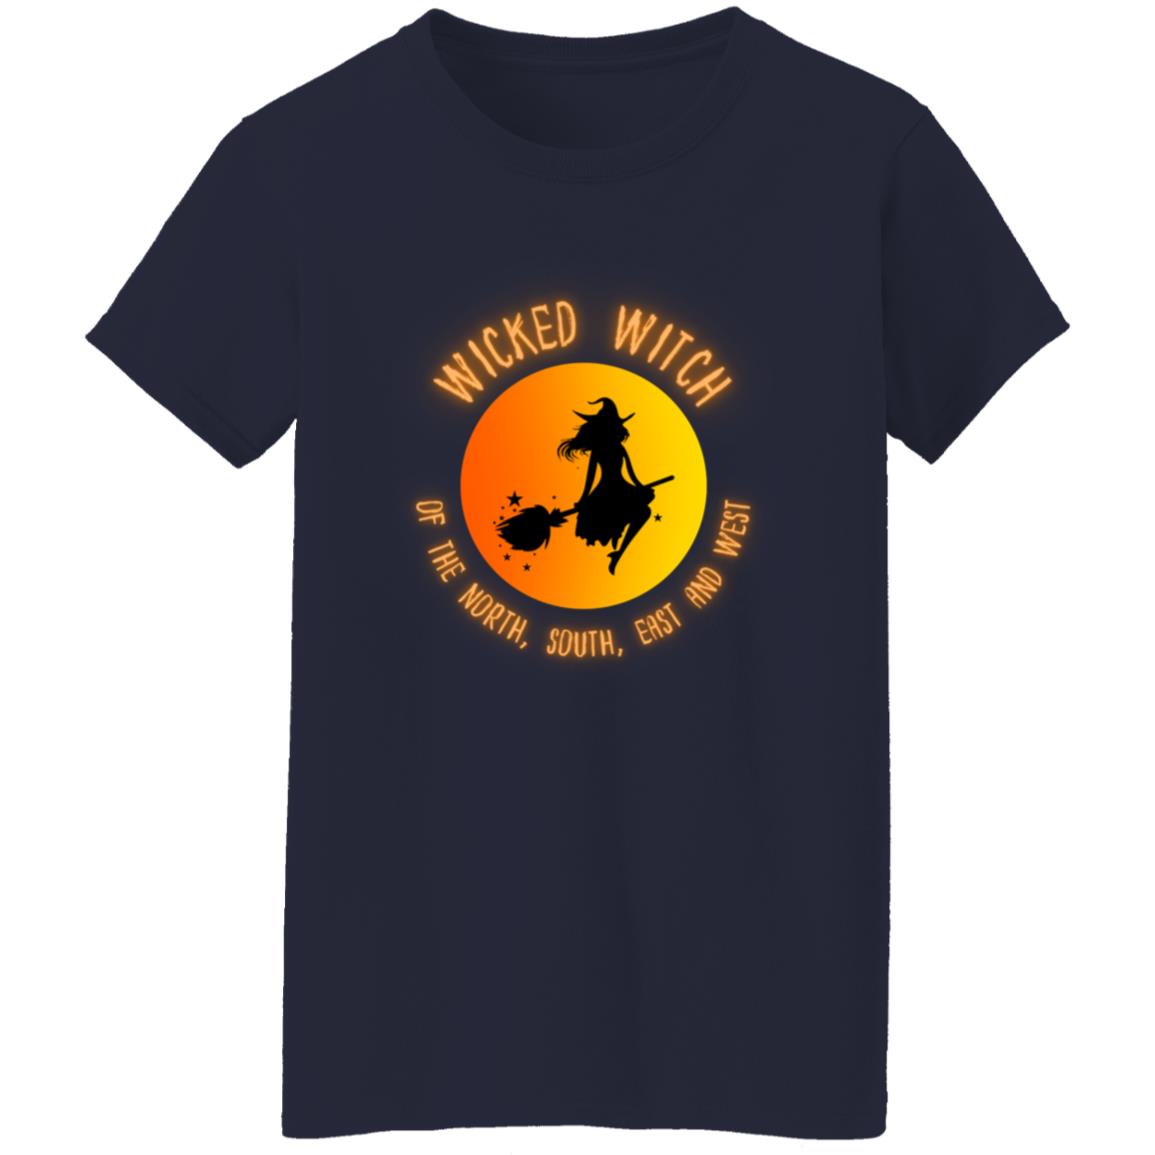 Wicked Witch of the North South East and West Wicked With of the North, South, East & West Ladies' Halloween T-Shirt